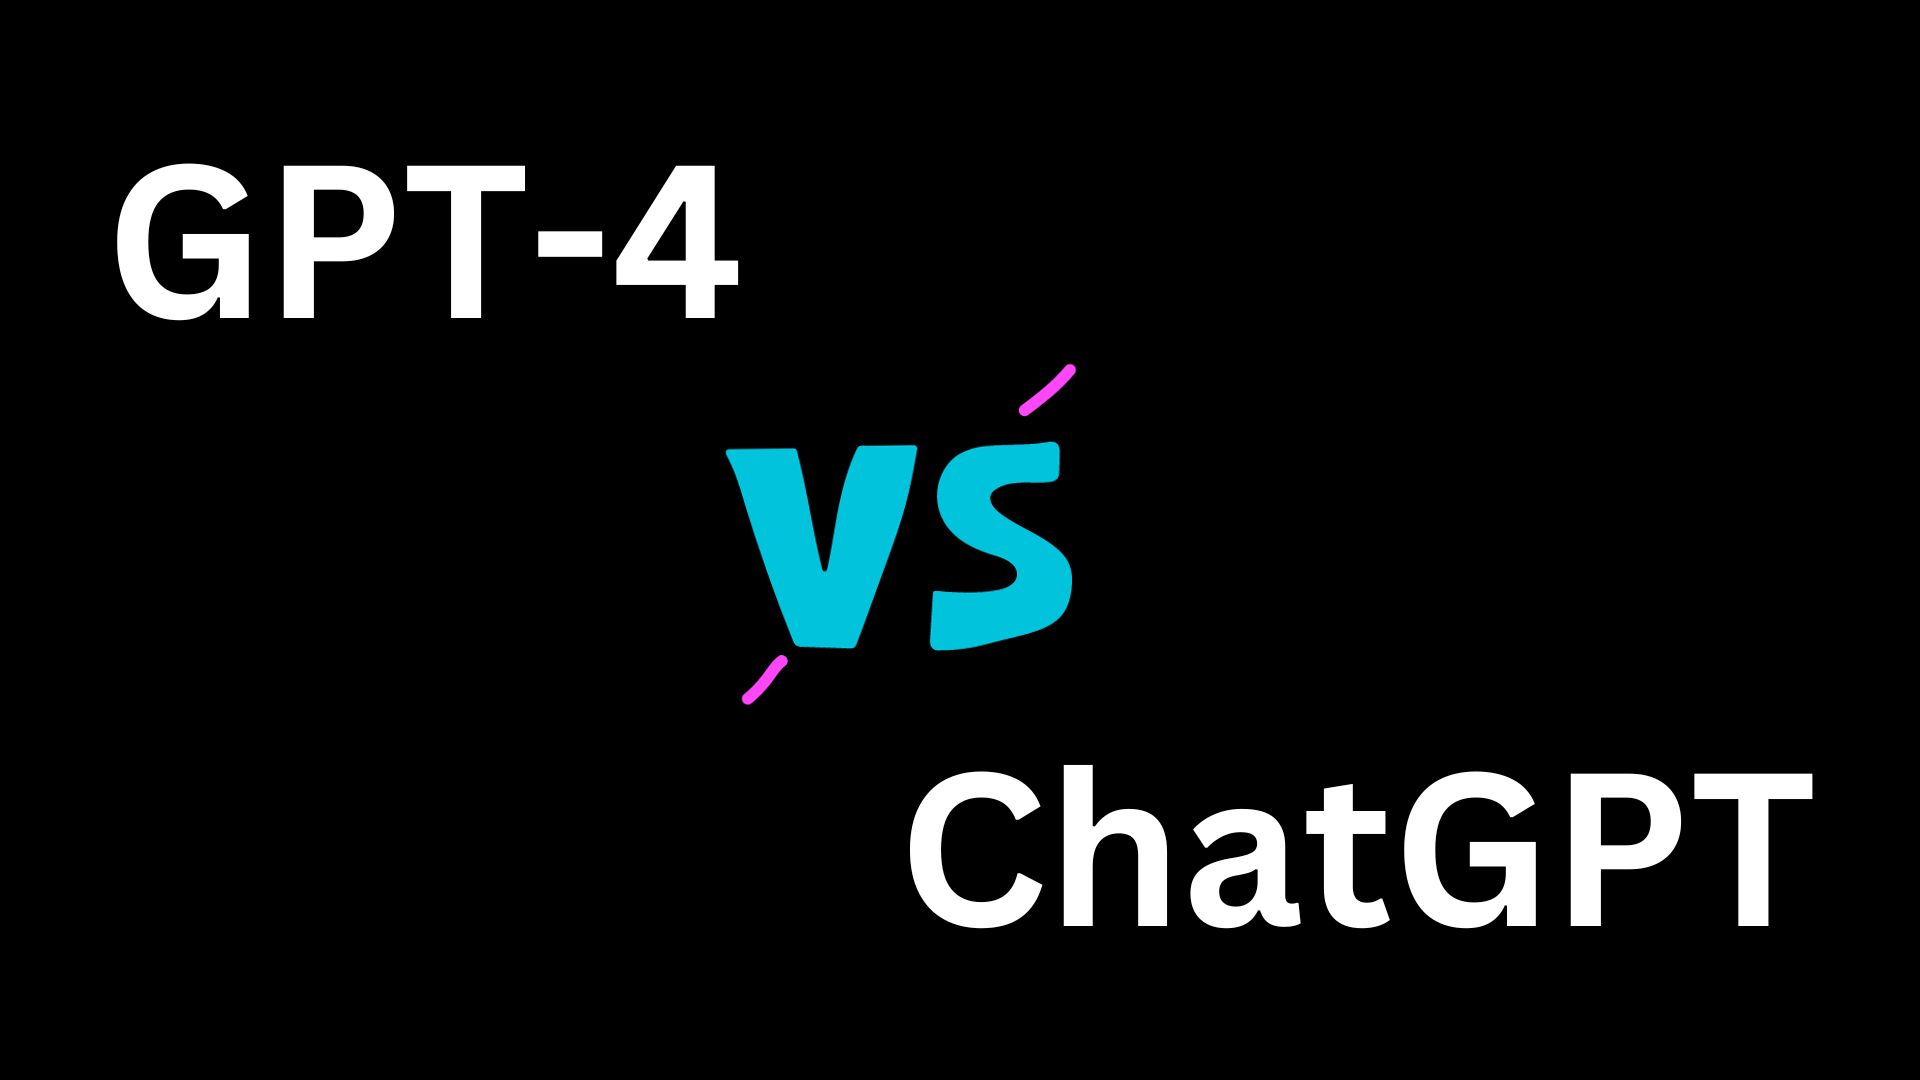 What Is The Difference Between GPT-4 And ChatGPT?